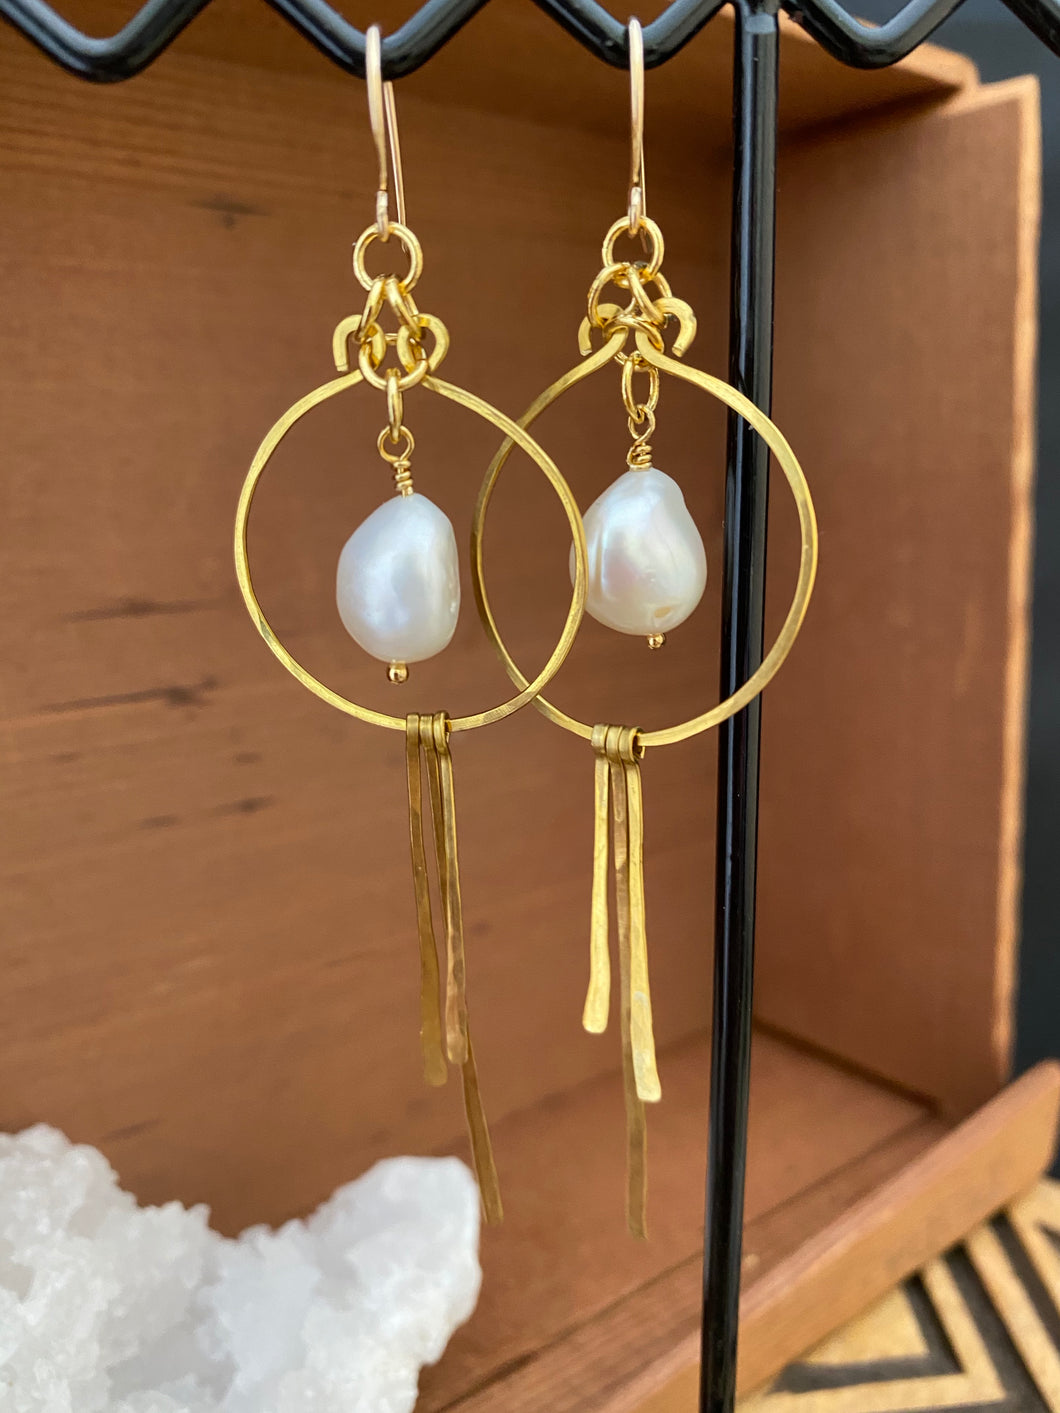 Brass and Freshwater Pearl Statement Earrings - Gold Filled Ear Wires